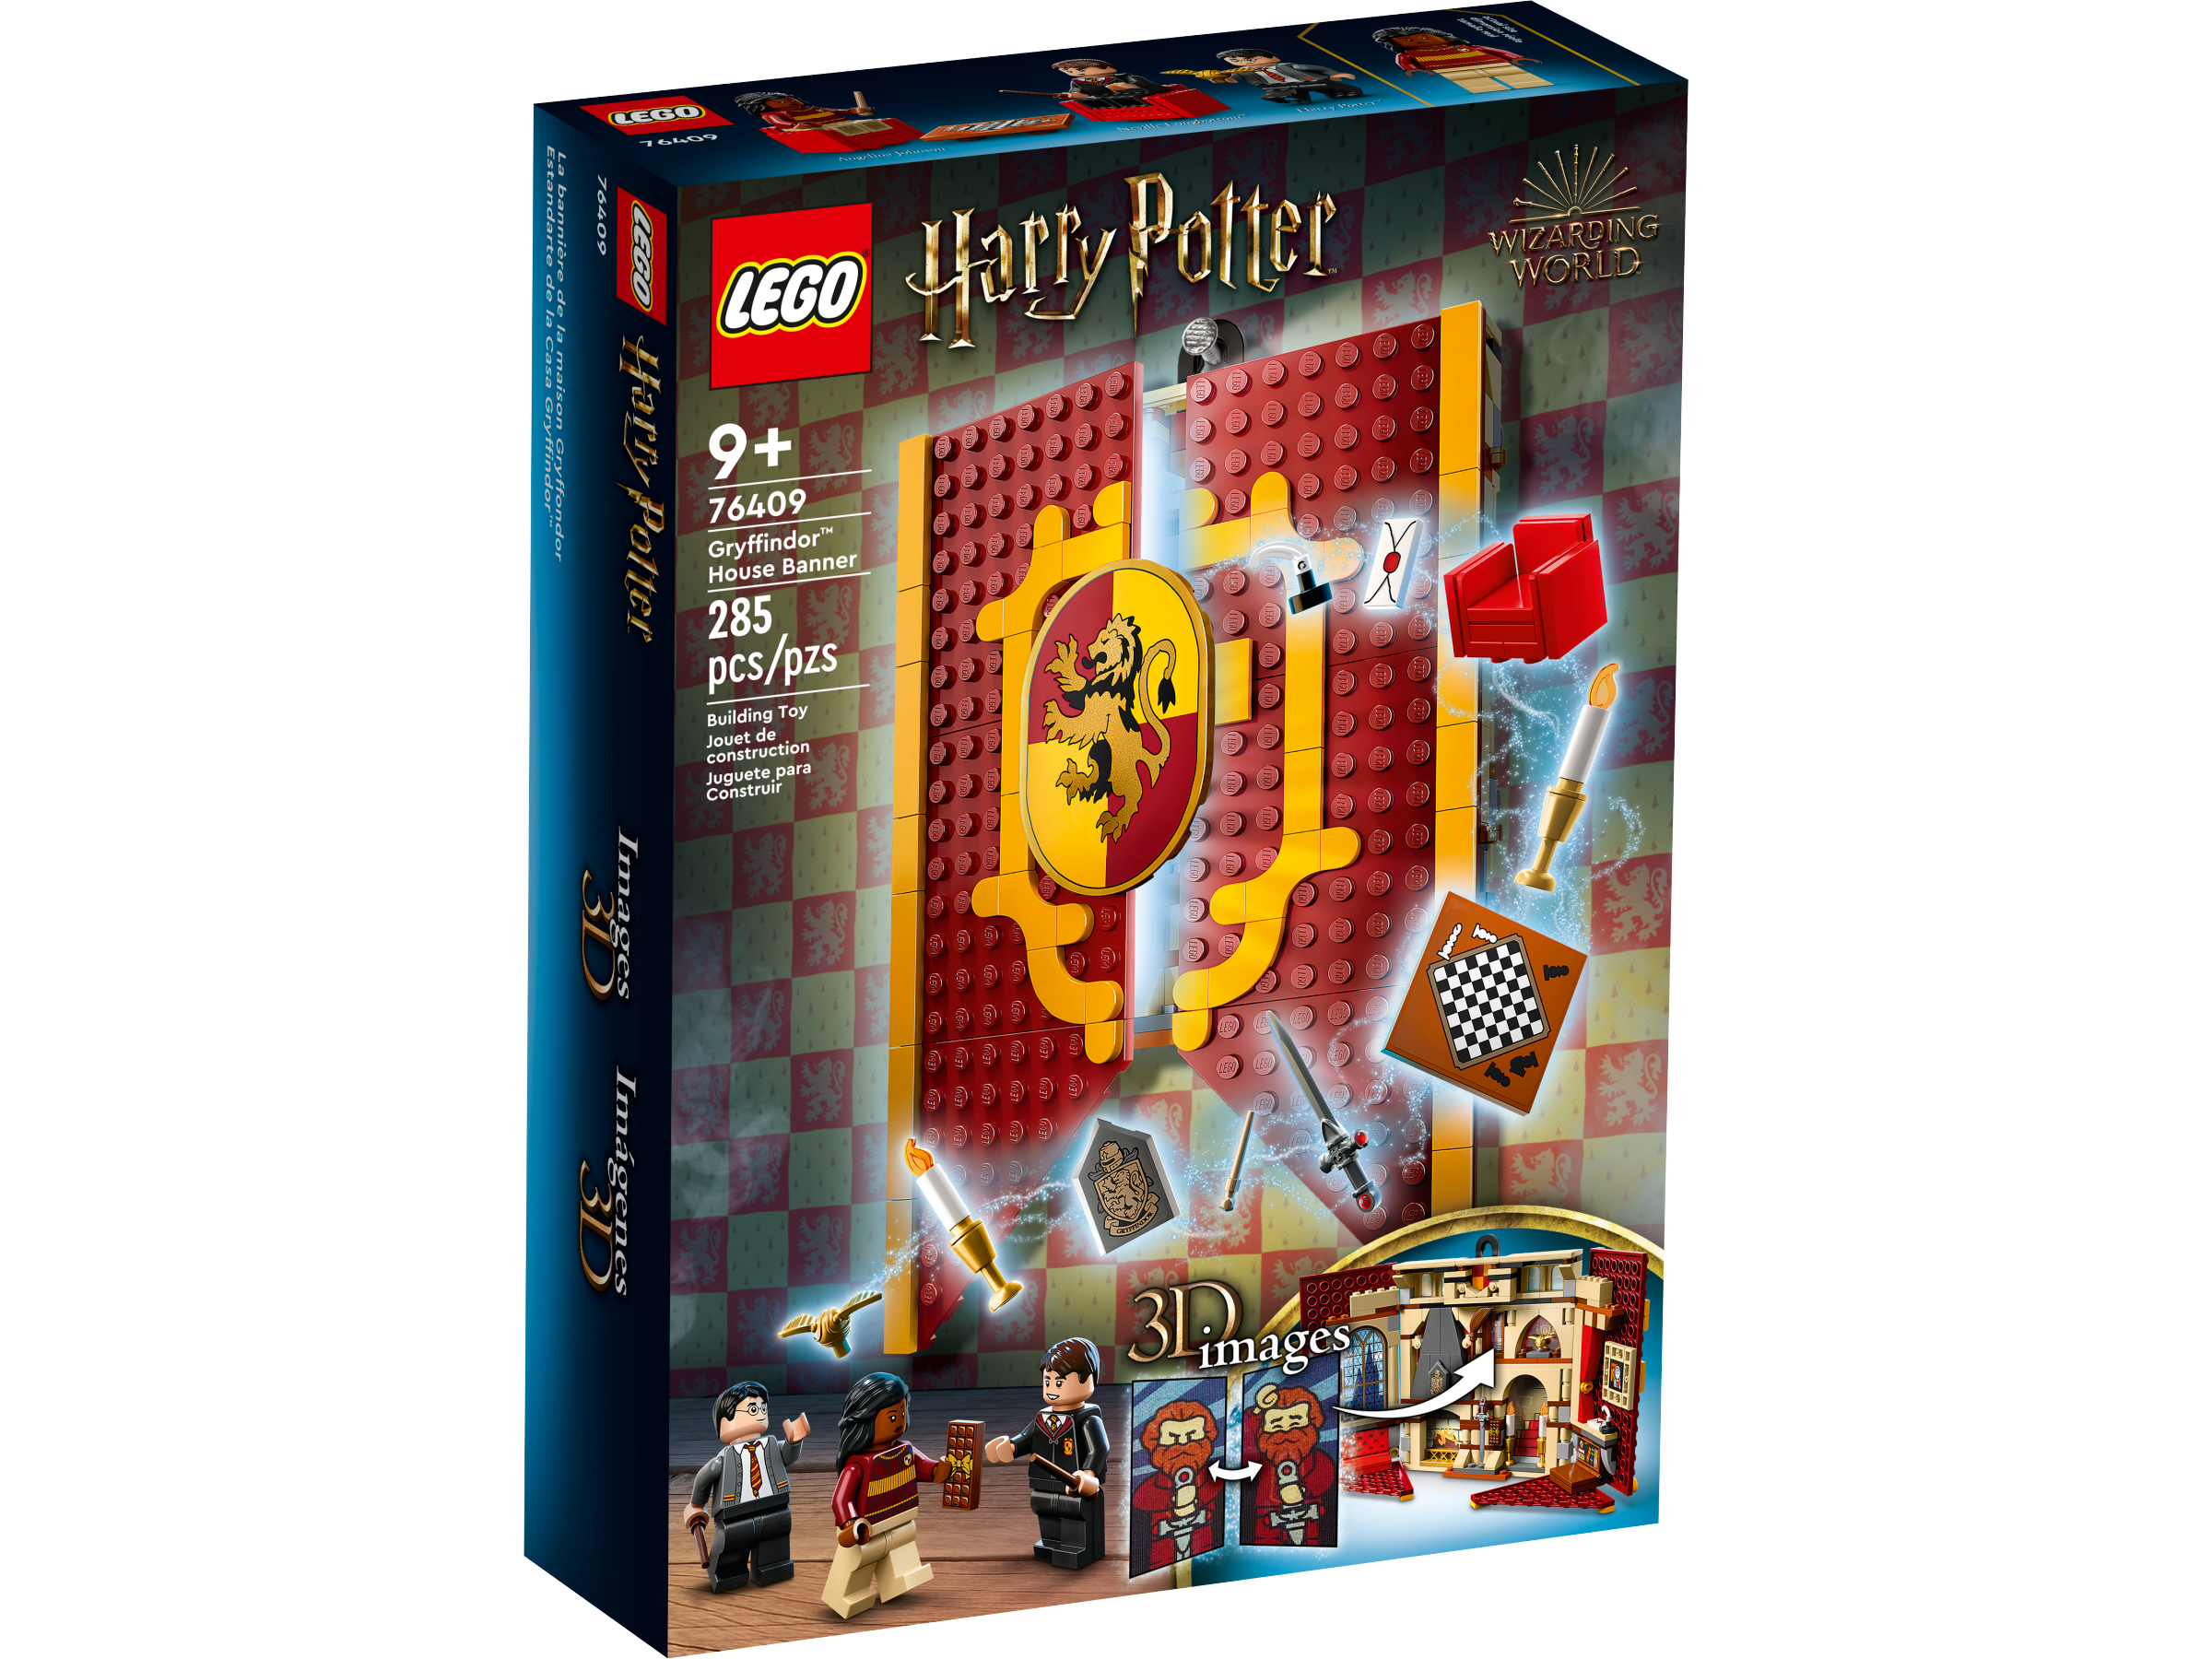 Early look at LEGO Harry Potter Hogwarts Banners